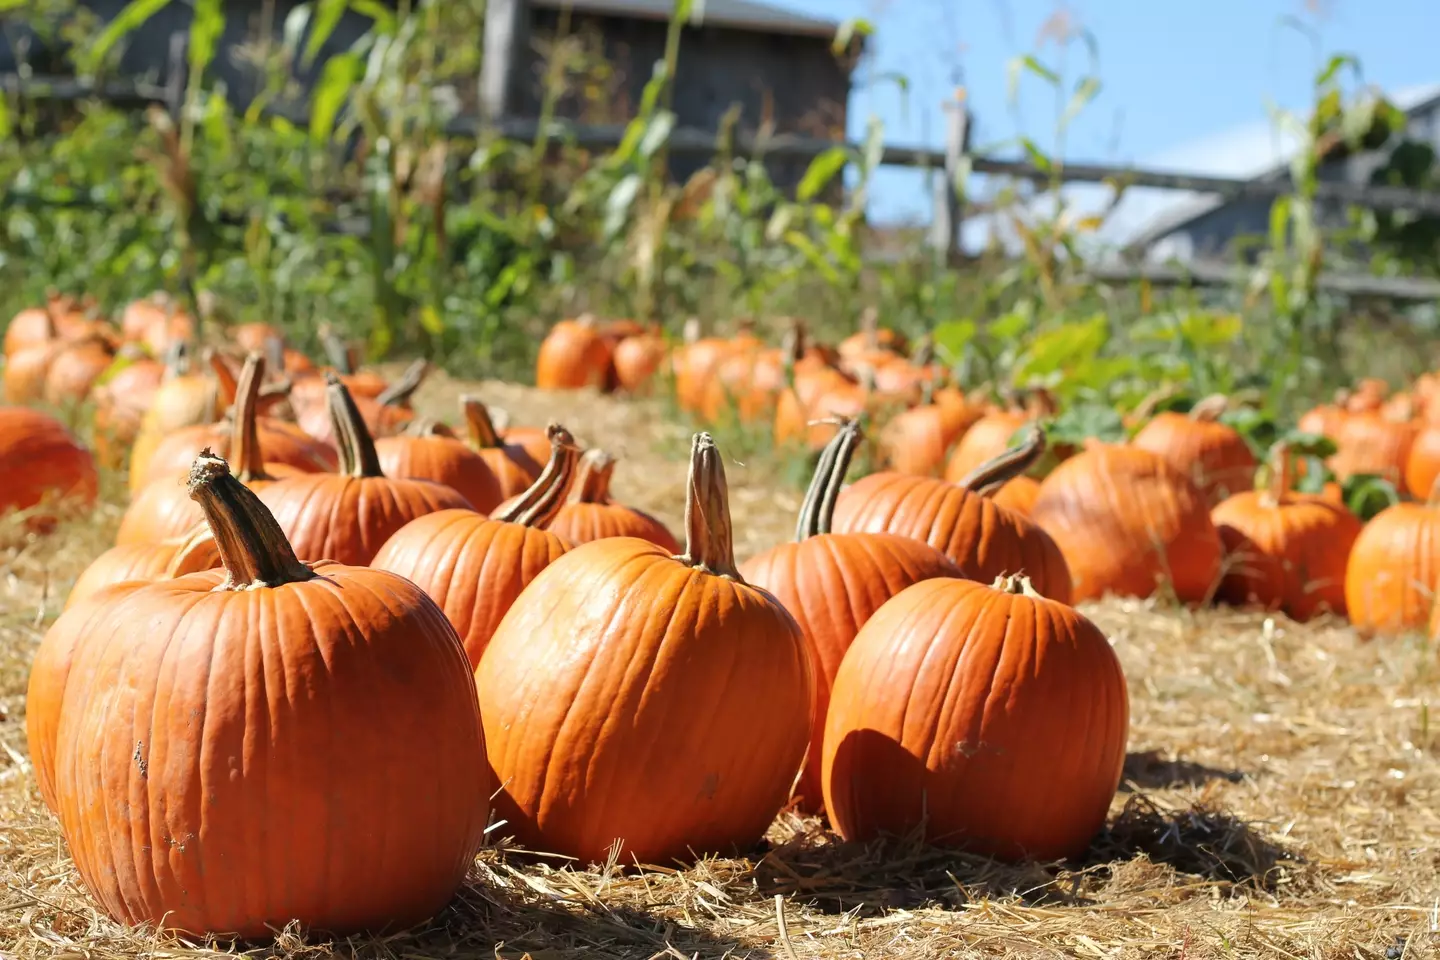 Pumpkin picking is the perfect way to get in the Halloween spirit.